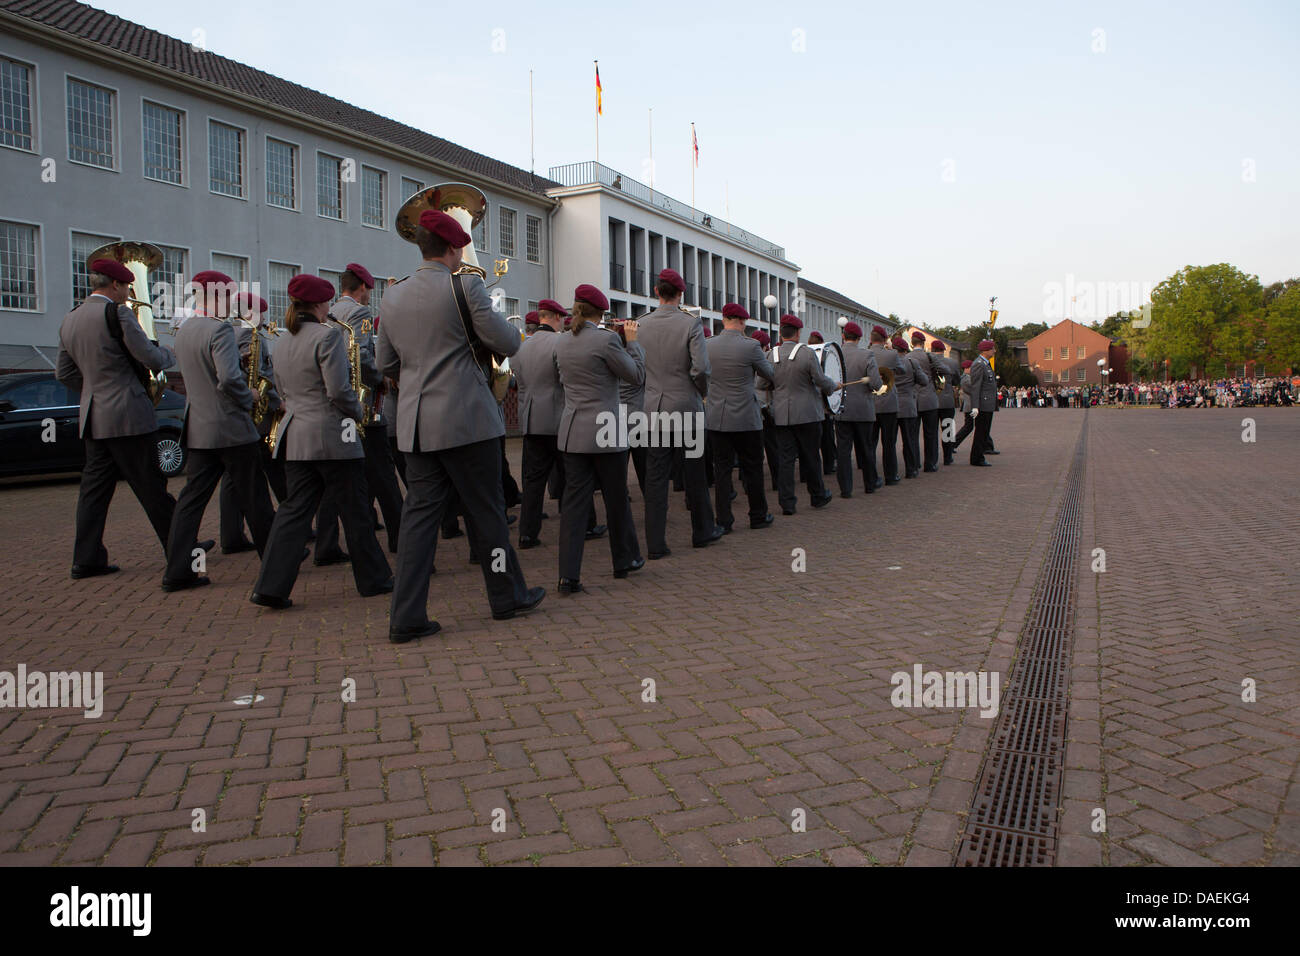 The German Army's Heeresmusikkorps 300 band from Koblenz performs in a Beating Retreat ceremony in front of The Big House, Rheindahlen Military Complex, Germany Stock Photo